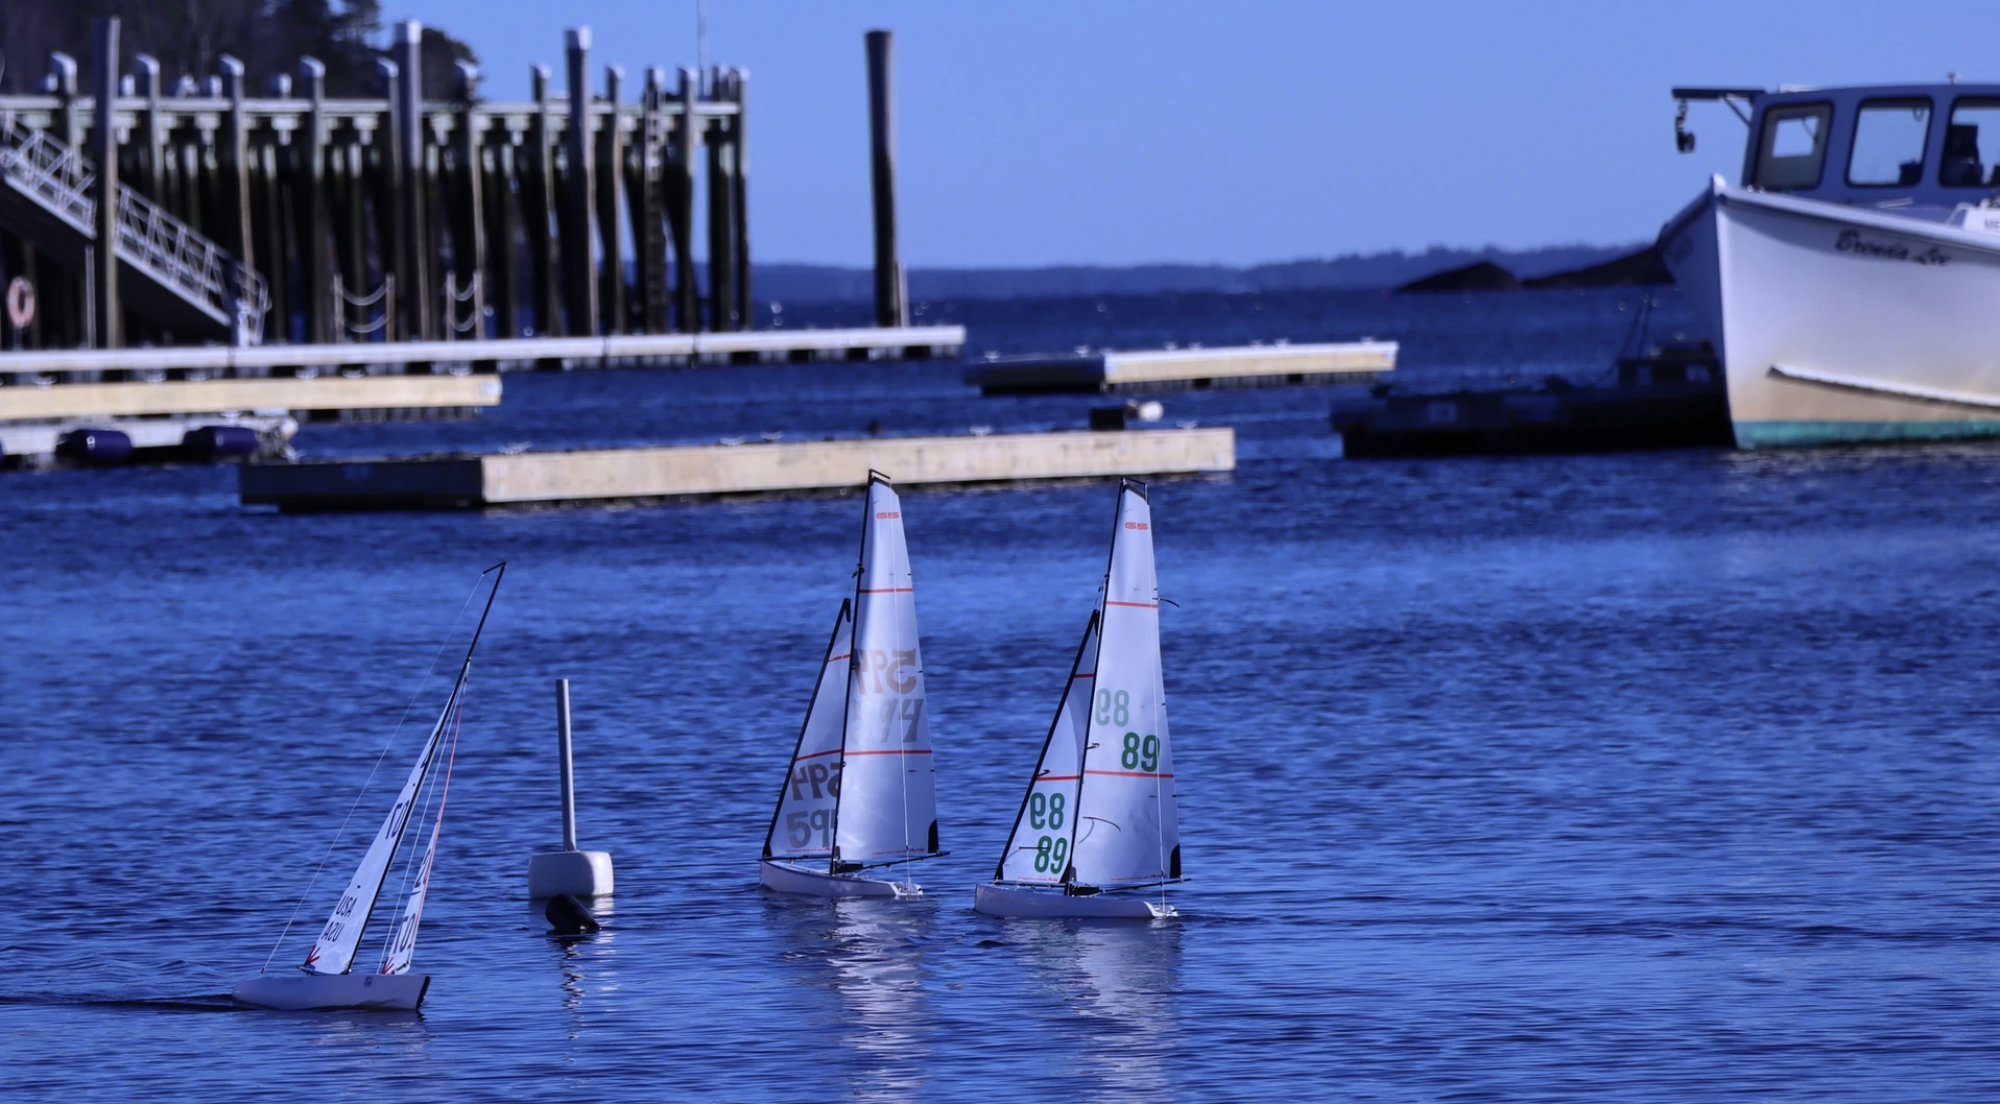 The image shows a calm water scene with miniature sailboats, a dock in the background, and a larger boat on the right side, under a blue sky.